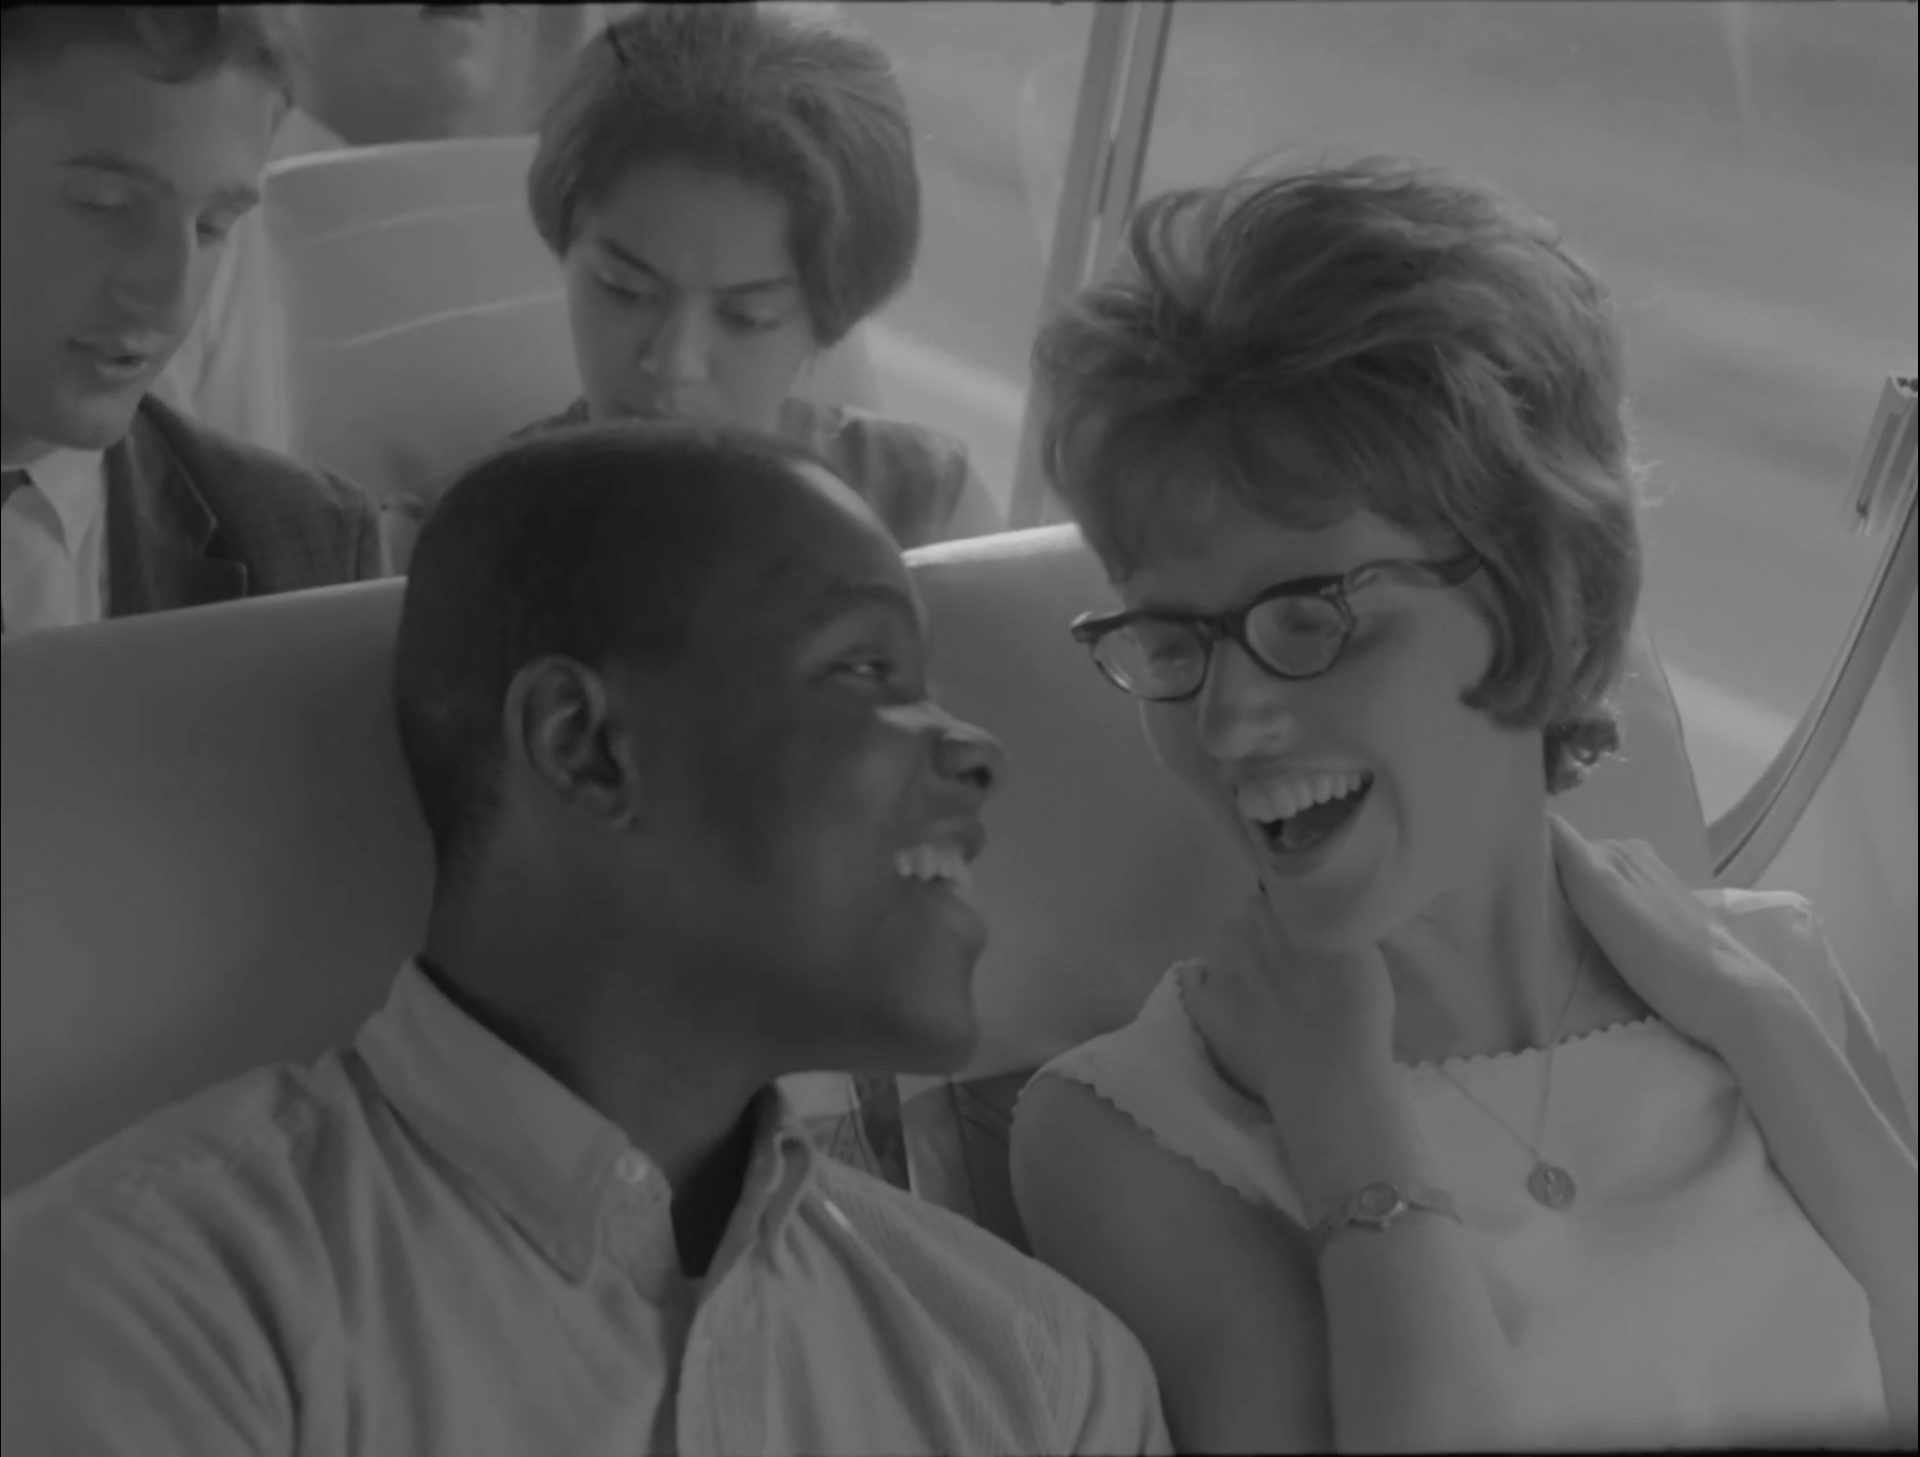 A man and a woman laugh while sitting next to each other on a bus.